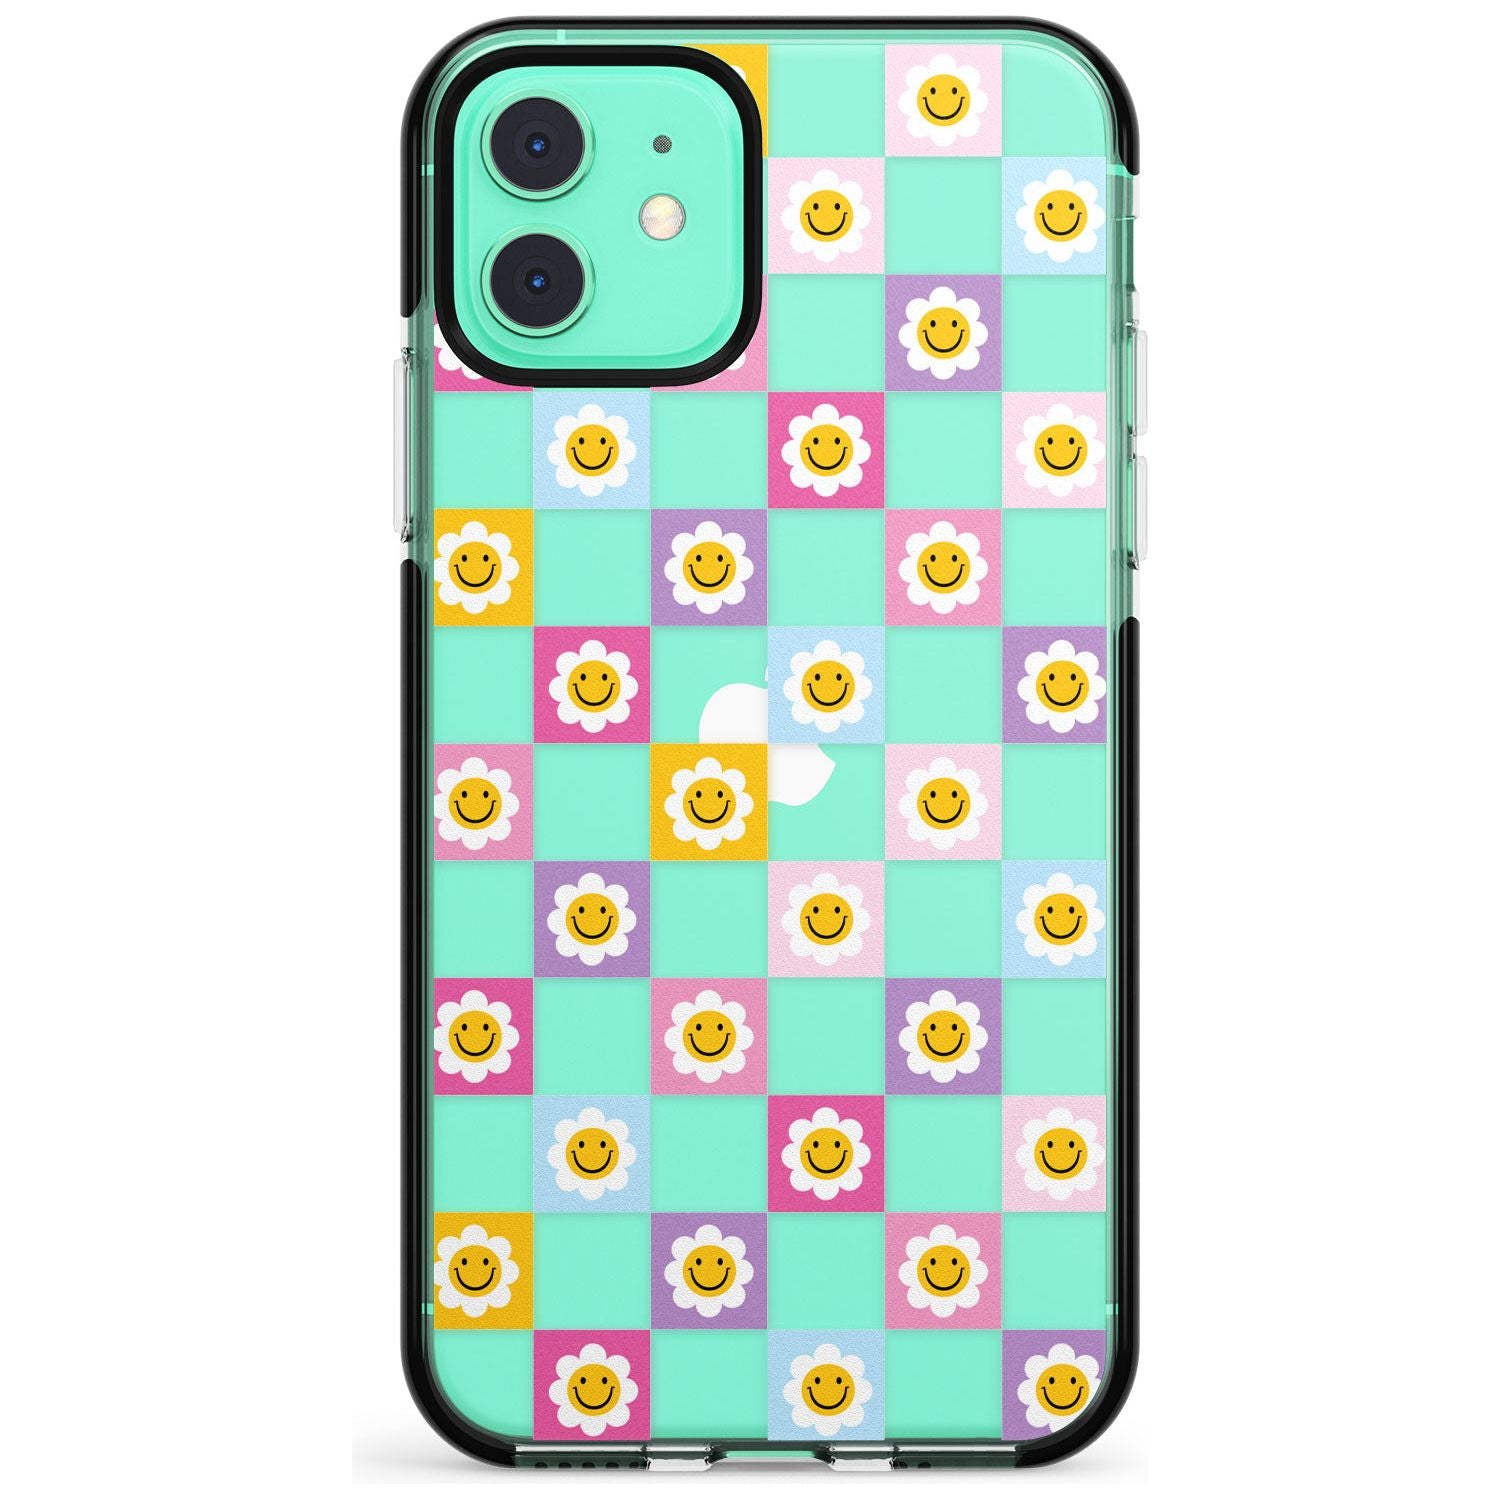 Daisy Squares Pattern Black Impact Phone Case for iPhone 11 Pro Max